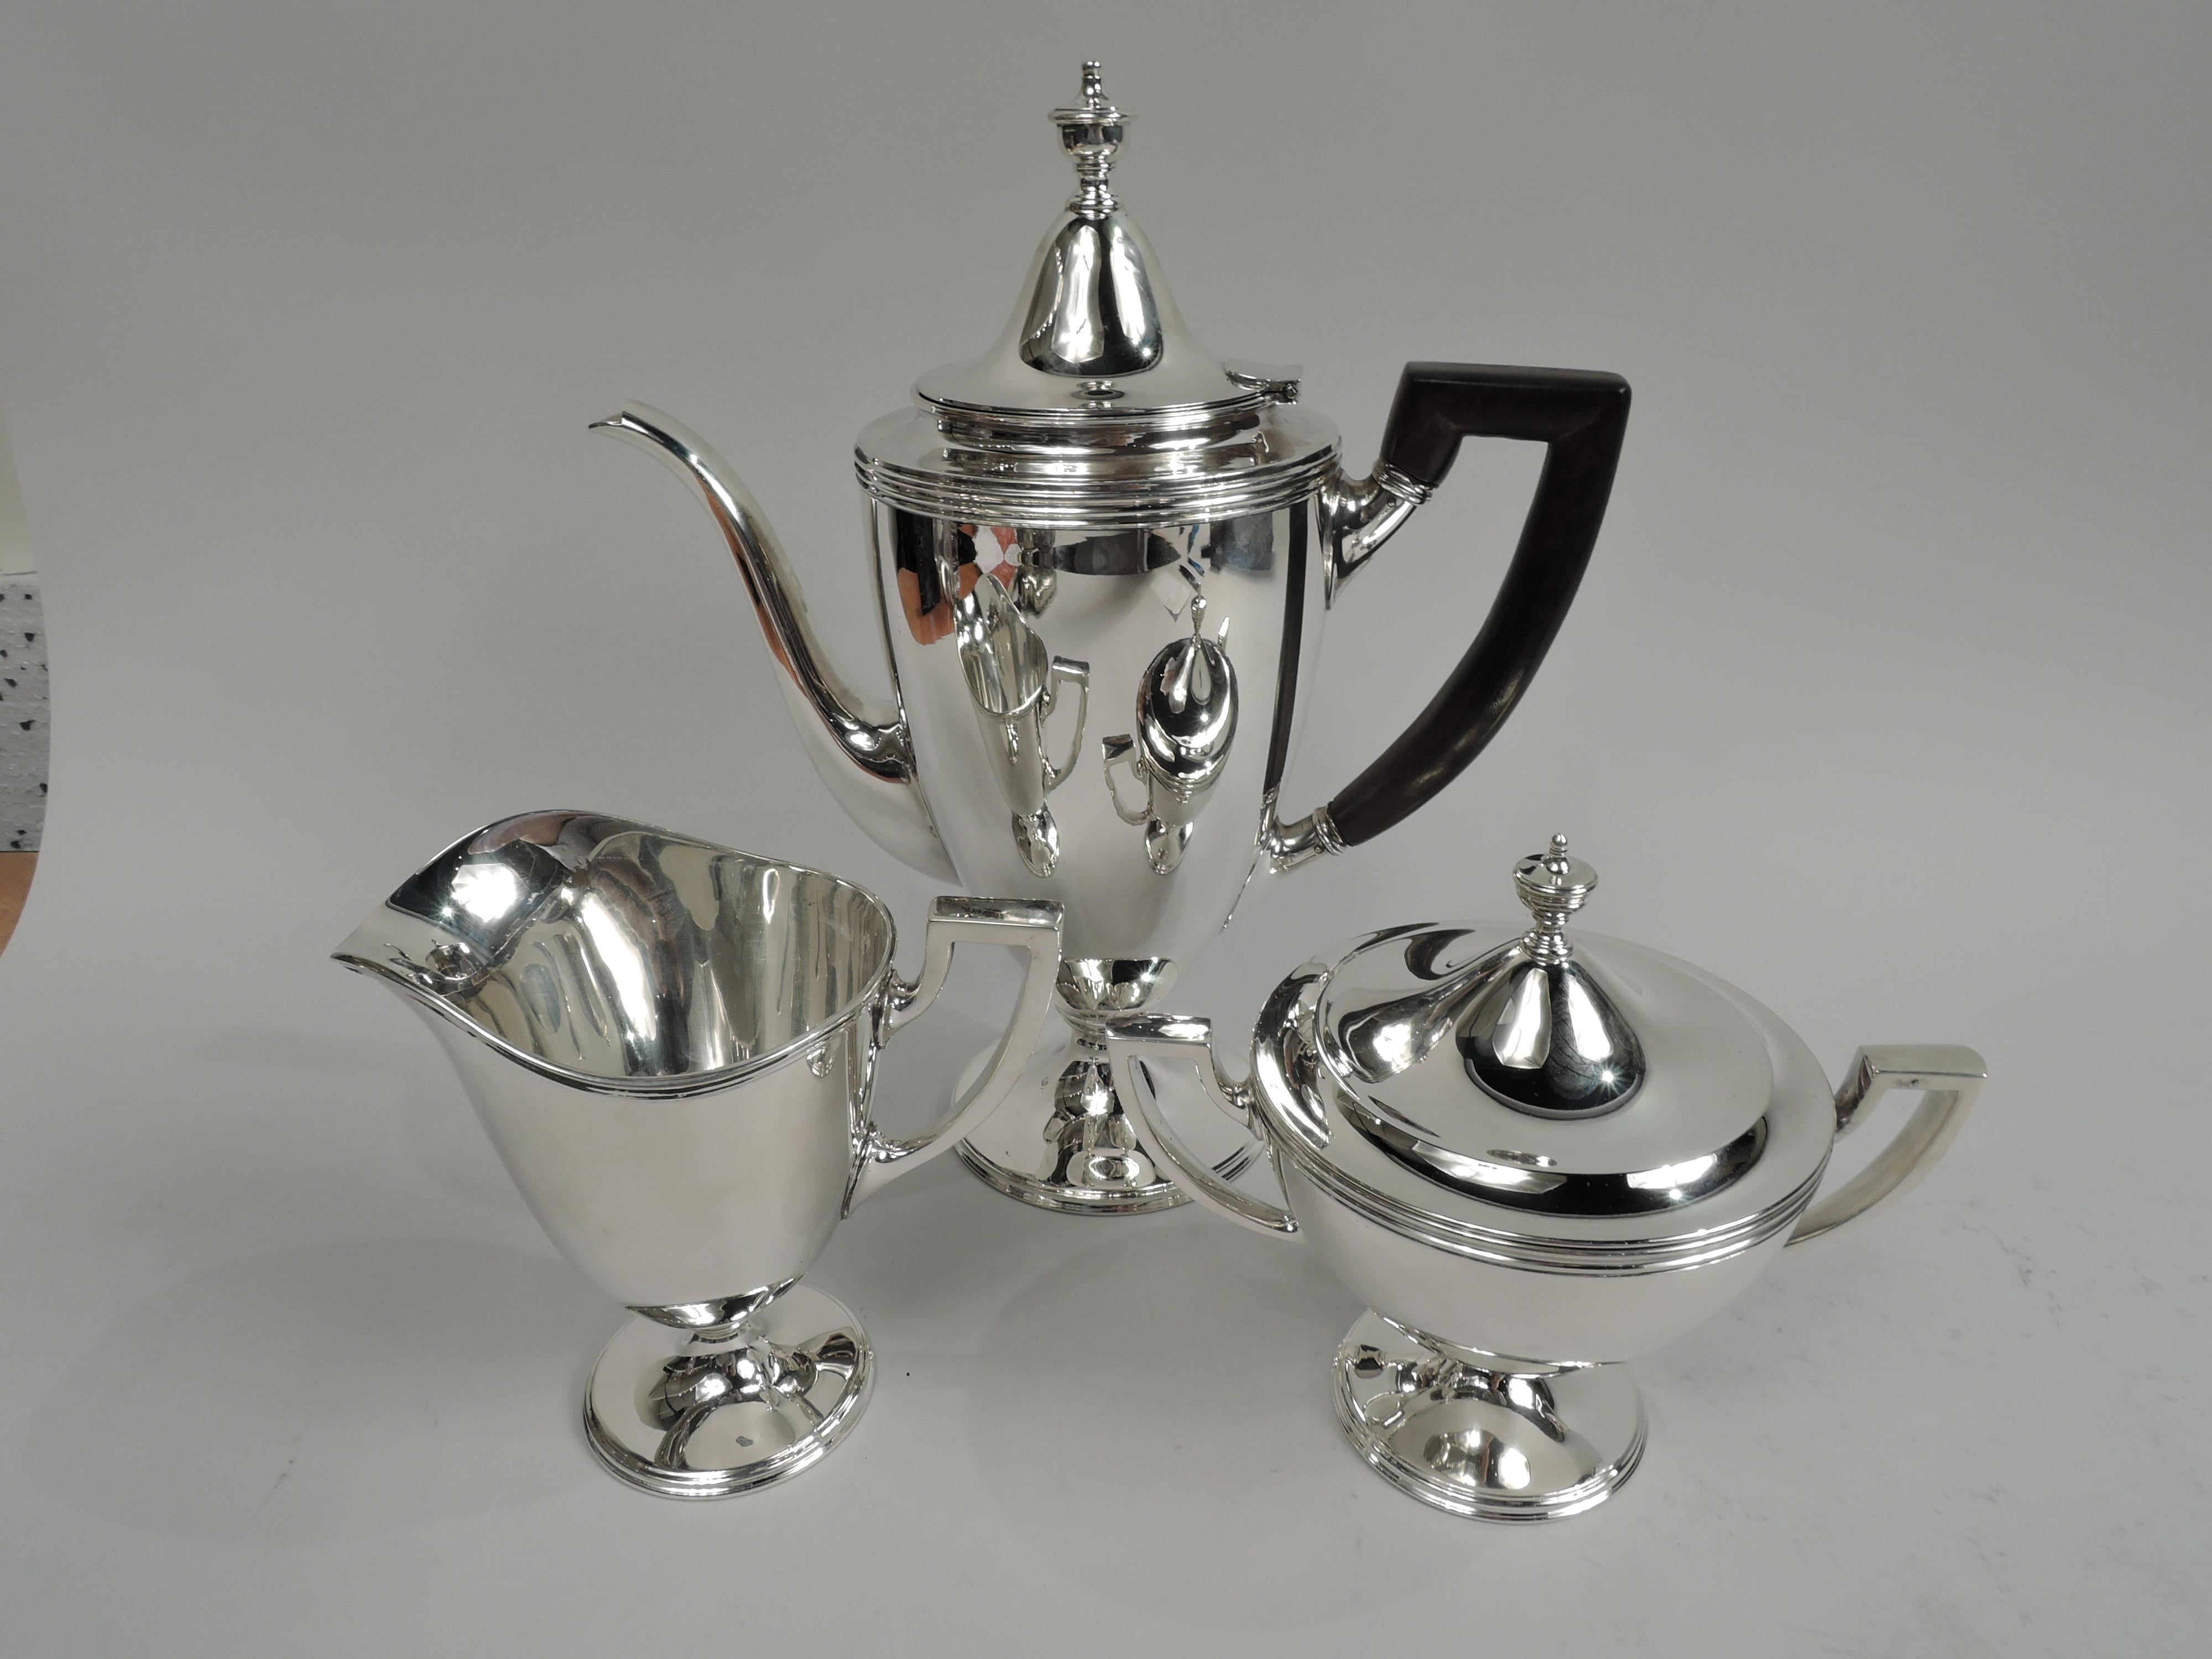 Neoclassical Revival Tiffany American Classical Sterling Silver 3-Piece Coffee Set on Tray